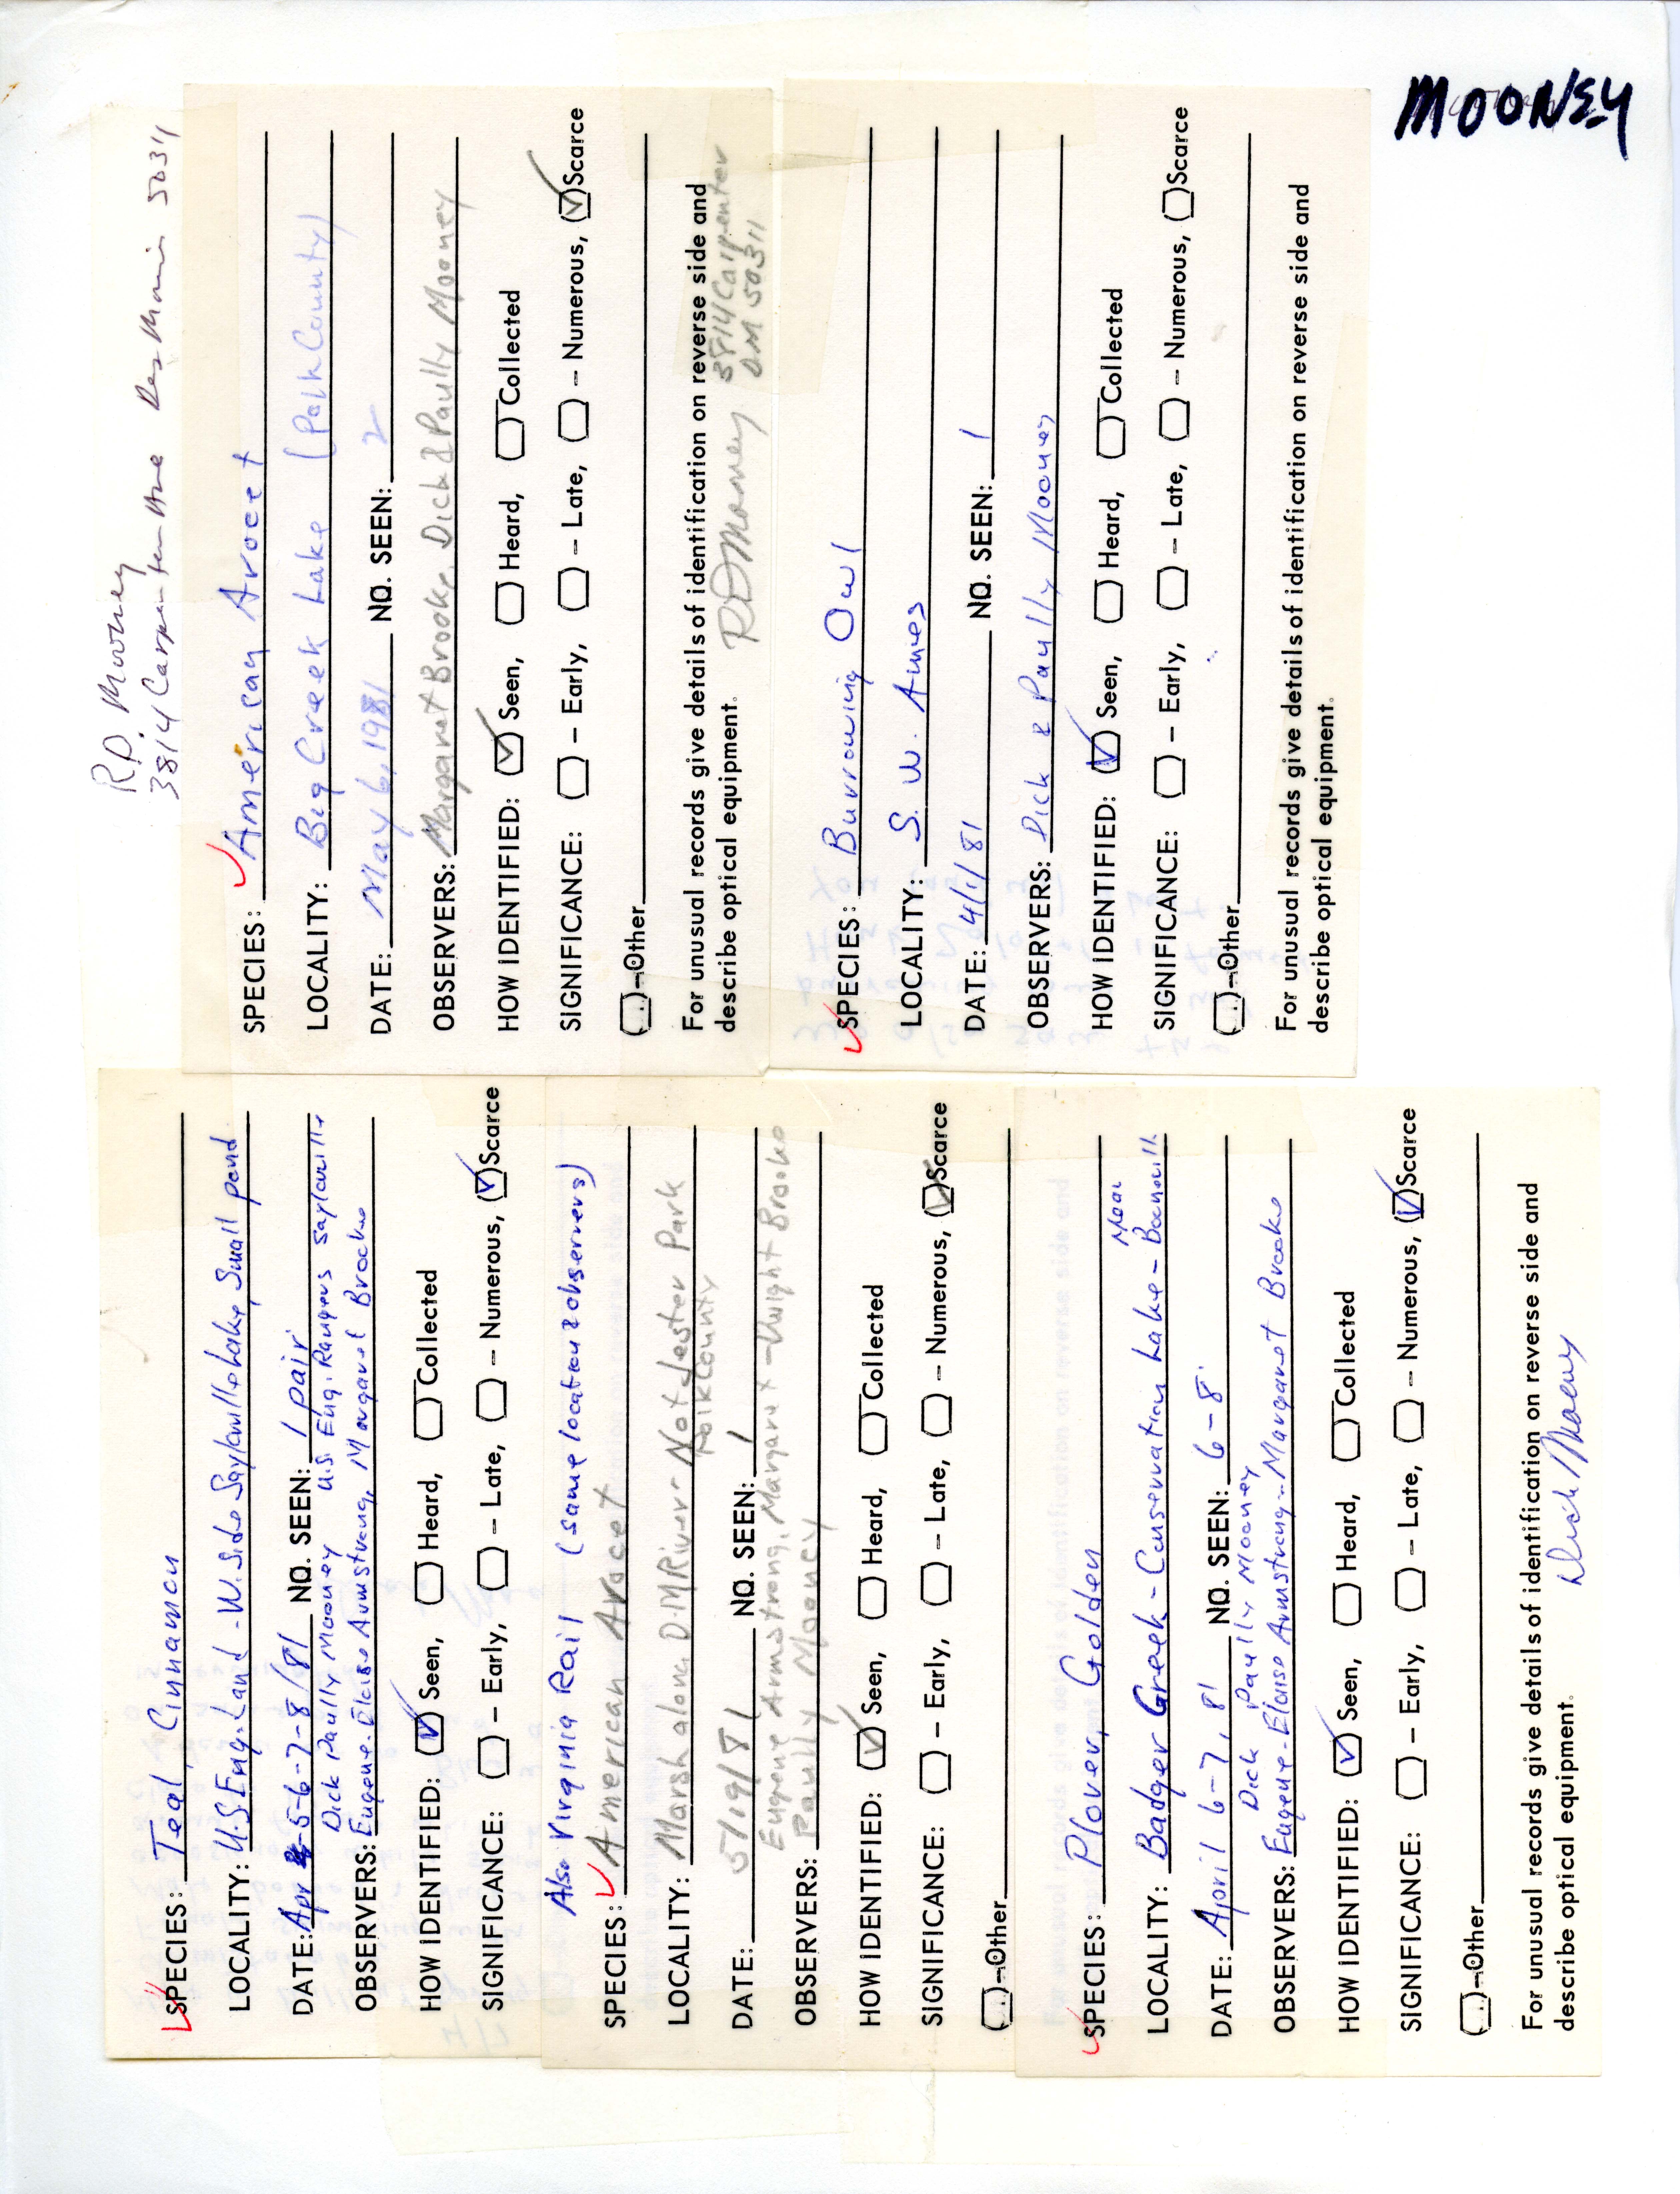 Bird sighting forms submitted by R.D. Mooney, spring 1981